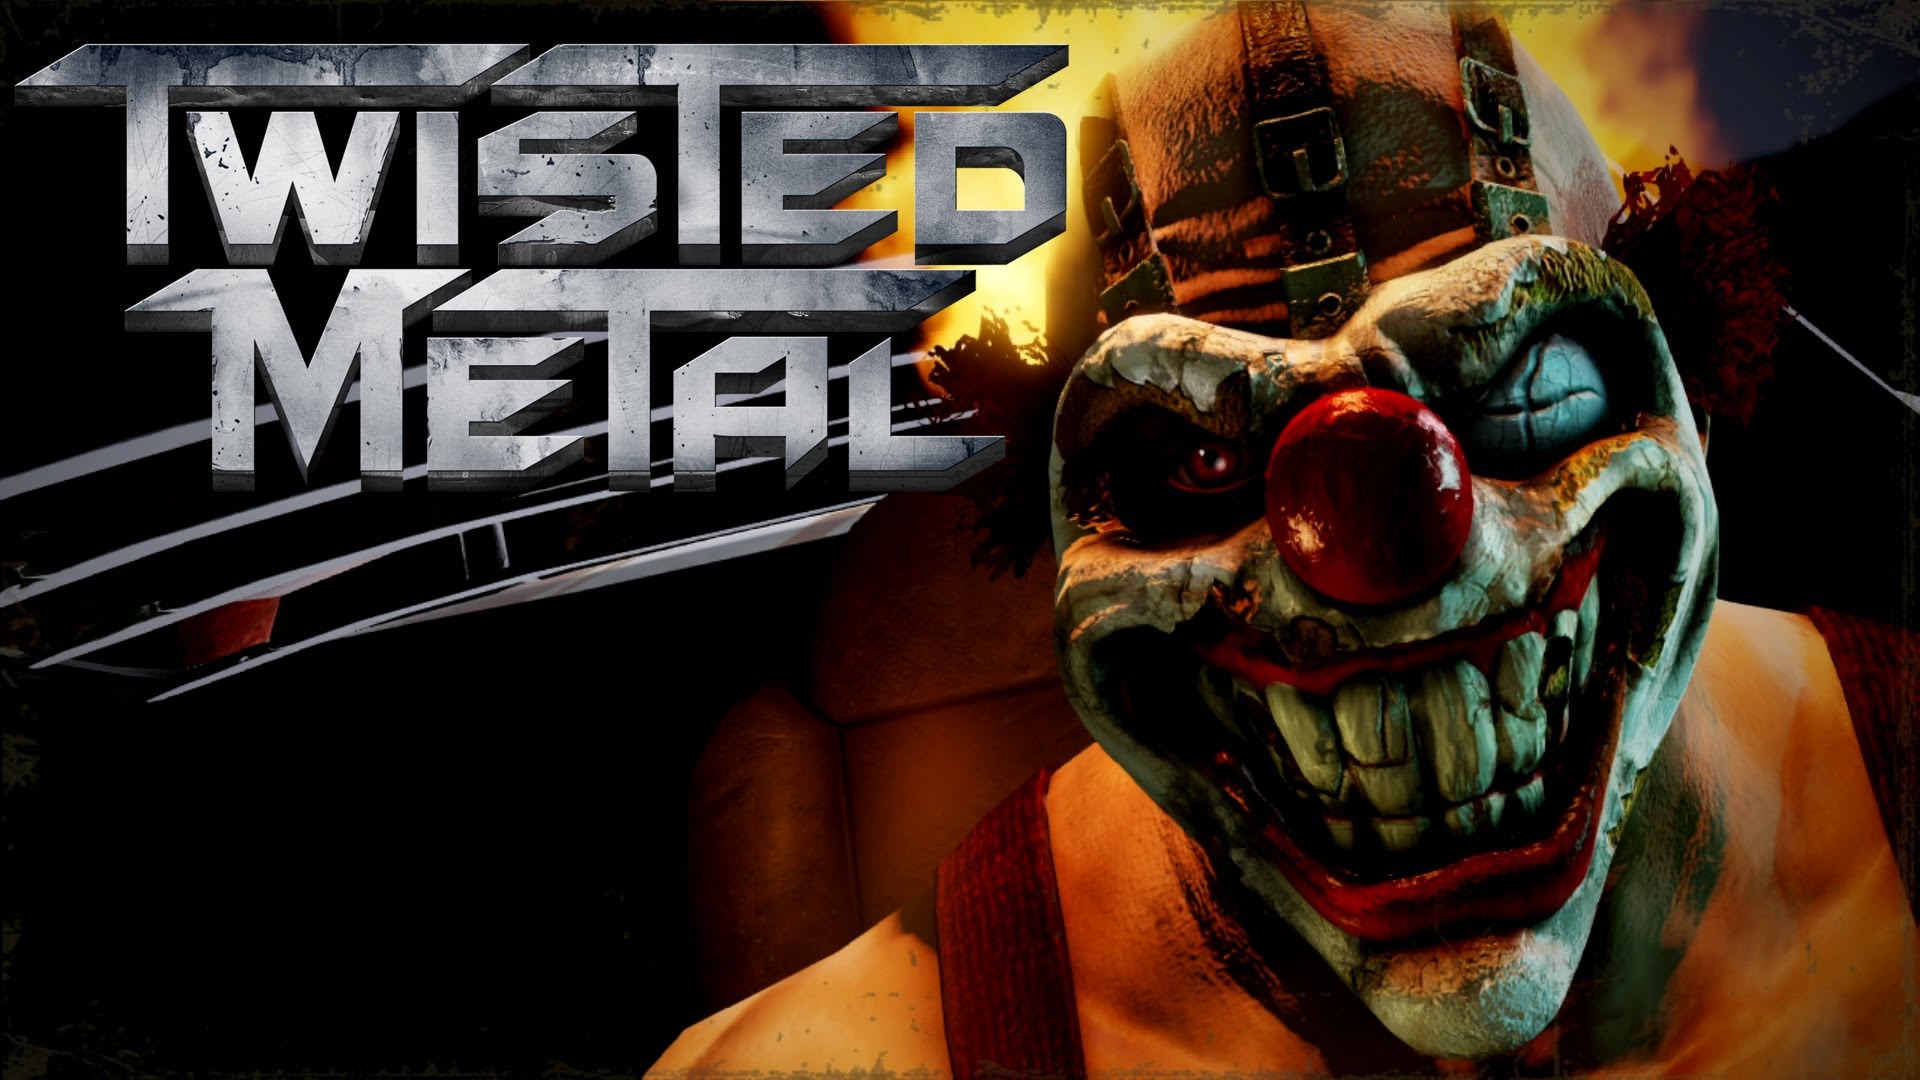 High Resolution Wallpaper | Twisted Metal 1920x1080 px